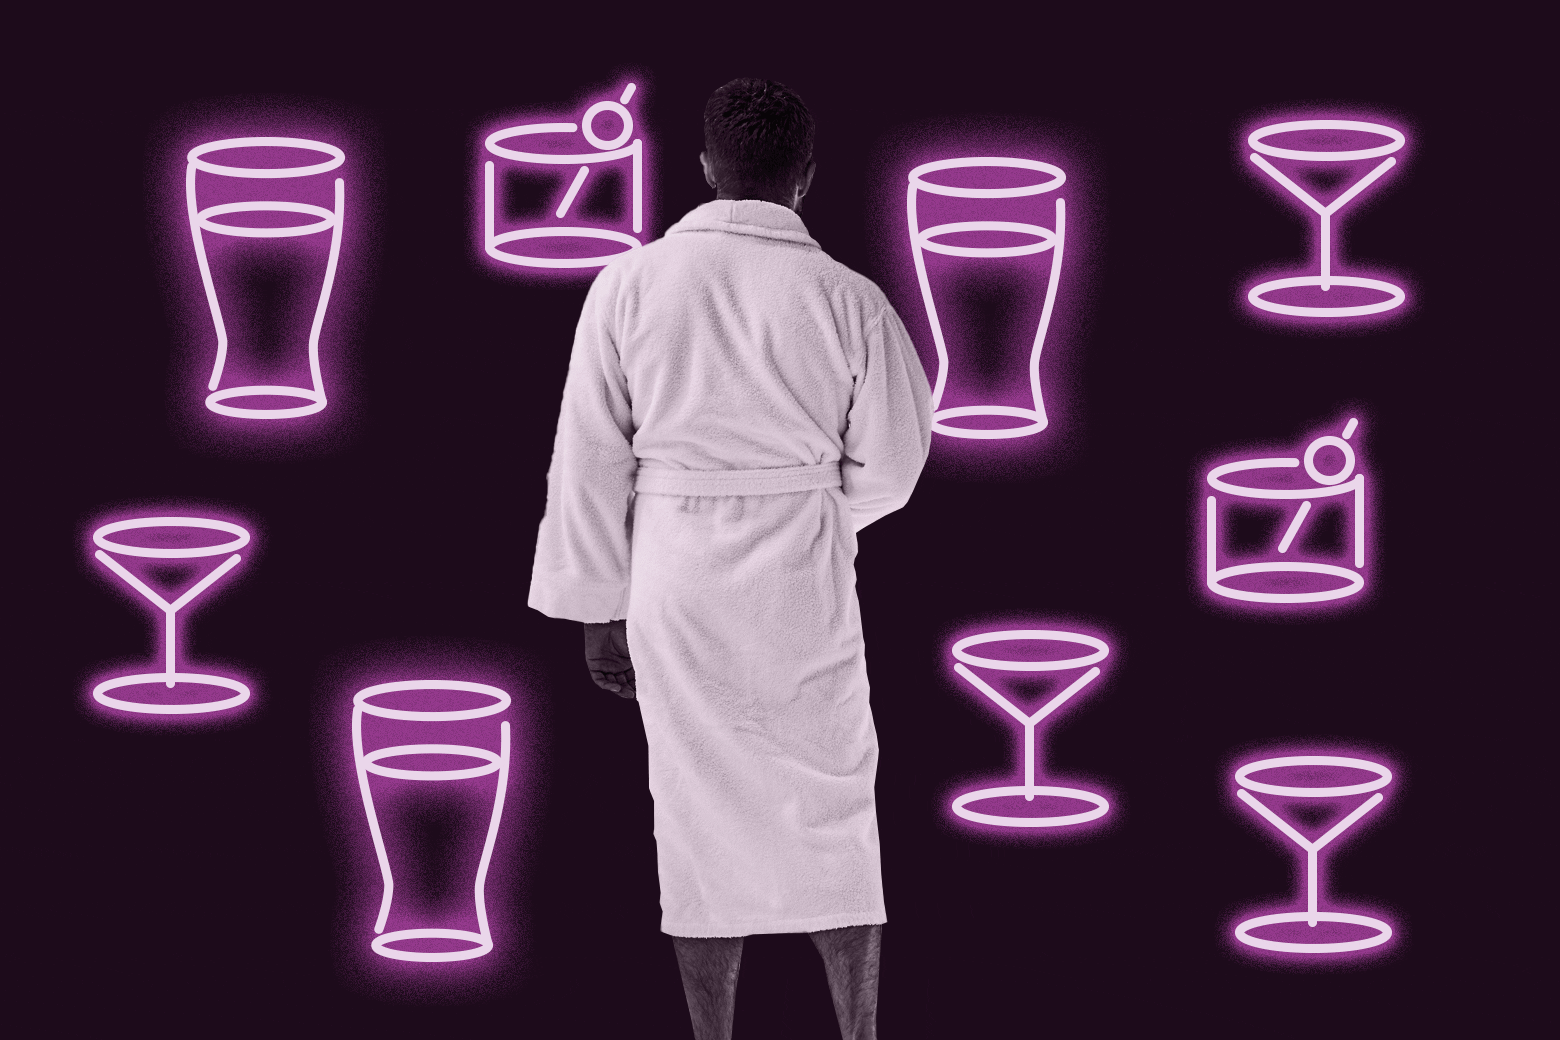 A man in a bathrobe with an assortment of neon glassware around him.